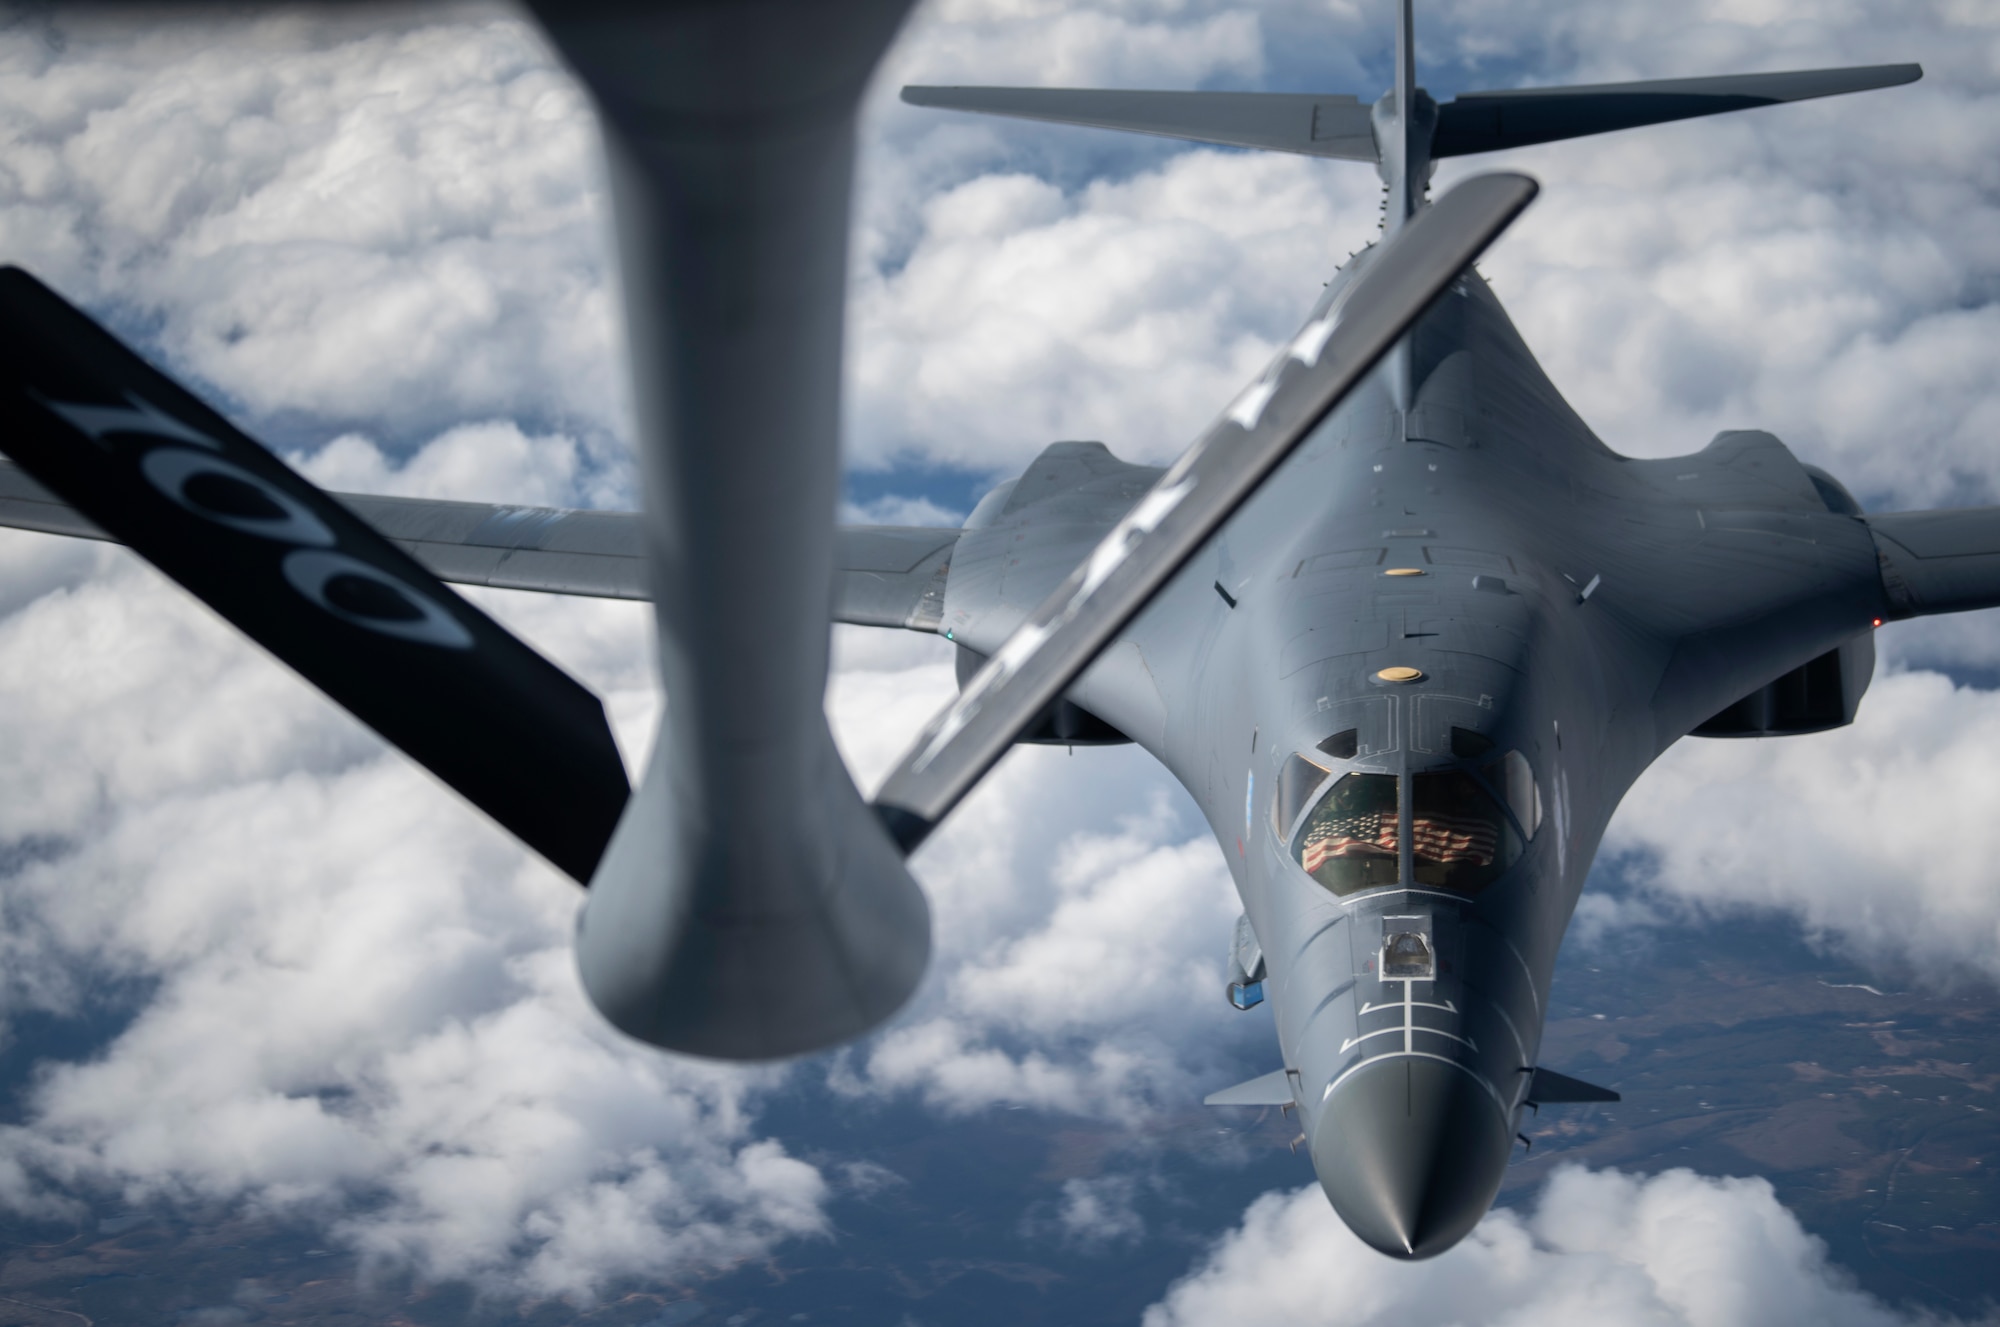 A B-1B Lancer from the 28th Bomb Wing, Ellsworth Air Force Base, South Dakota, prepares to receive fuel from a KC-135 Stratotanker from the 100th Air Refueling Wing, RAF Mildenhall, England, during a Bomber Task Force Europe mission over Sweden, May 20, 2020. Operations and engagements with our allies and partners demonstrate and strengthen our shared commitment to global security and stability. (U.S. Air Force photo by Tech. Sgt. Emerson Nuñez)